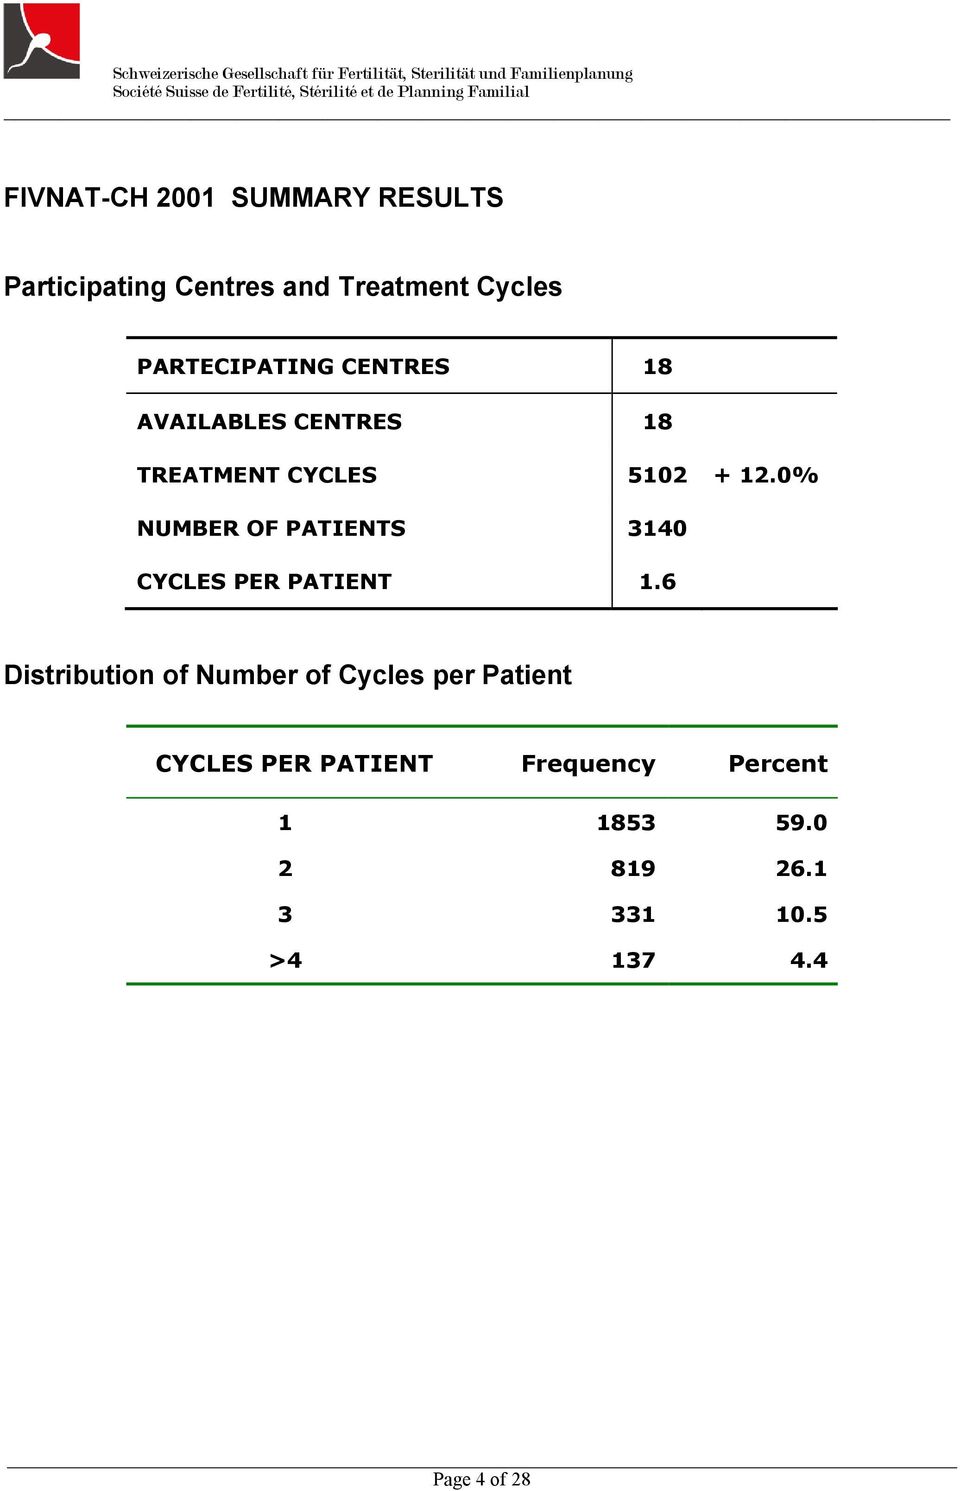 TREATMENT CYCLES 5102 + 12.0% NUMBER OF PATIENTS 3140 CYCLES PER PATIENT 1.